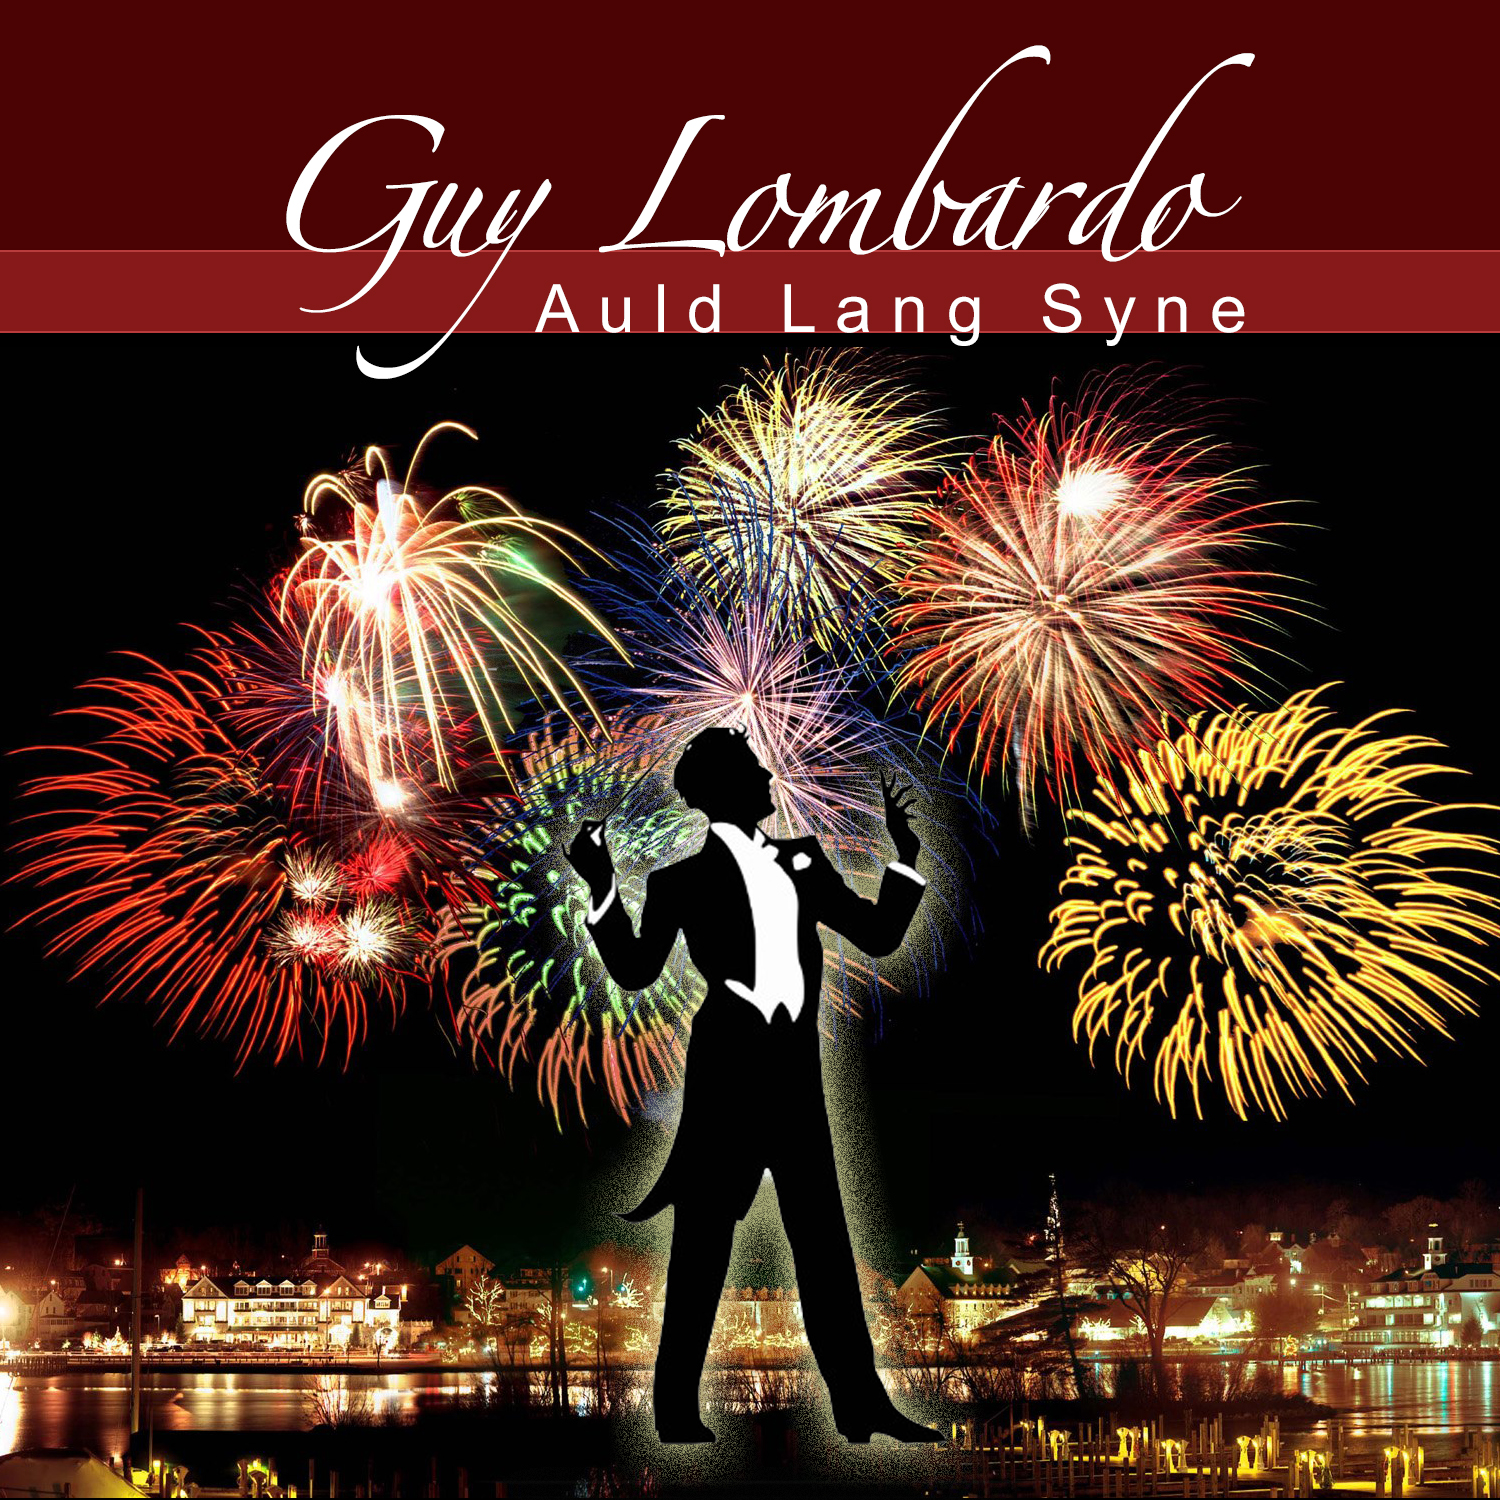 Auld Lang Syne by Guy Lombardo